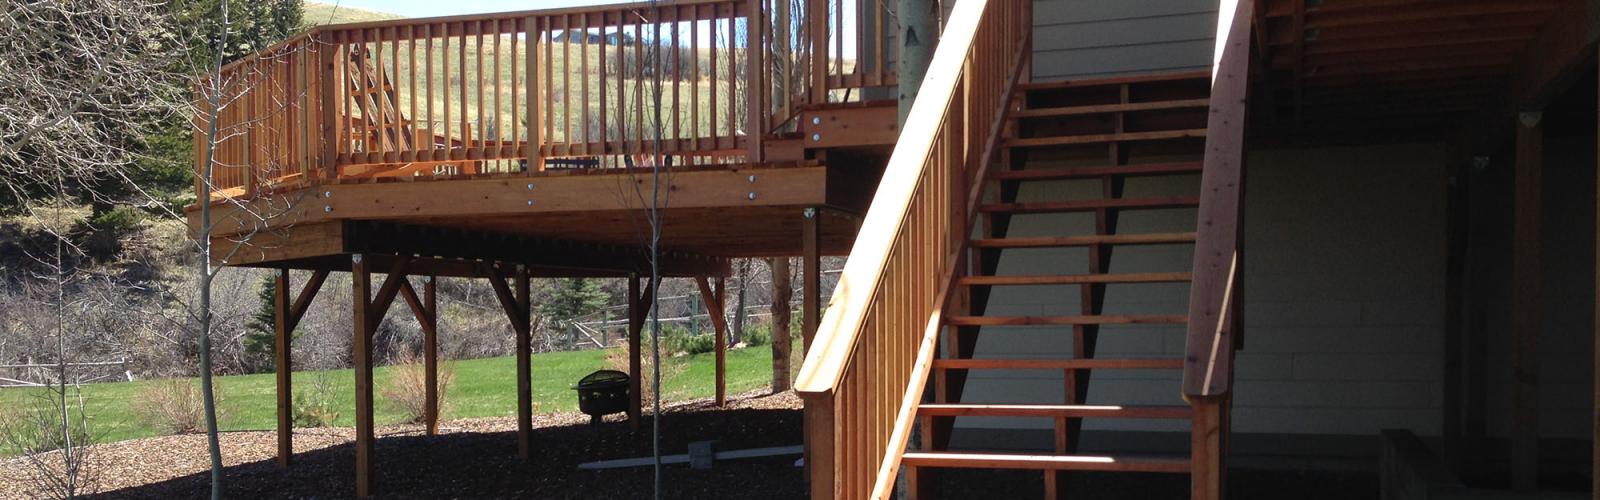 Redwood decking and stairs